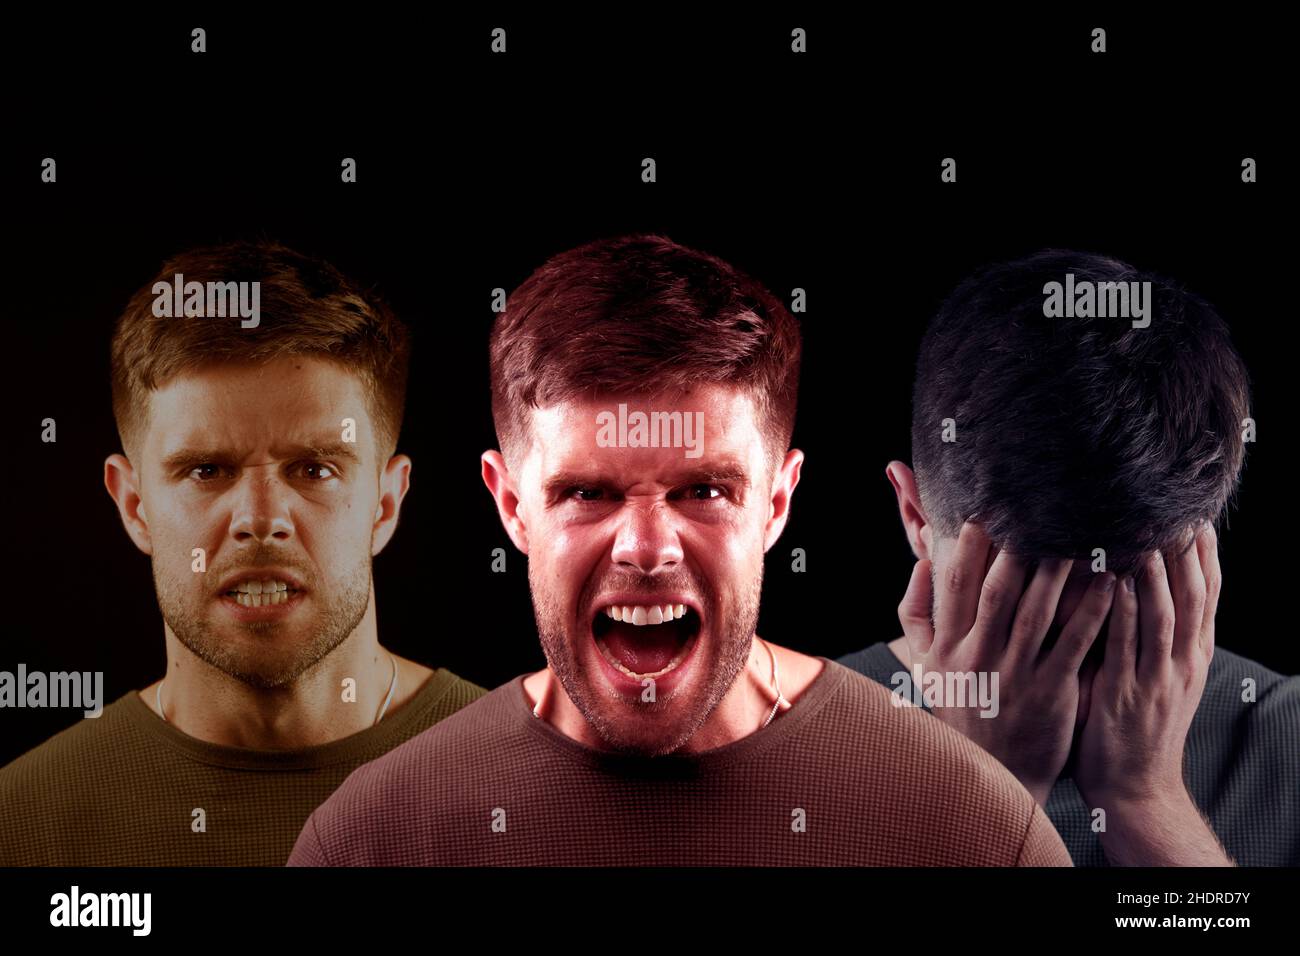 anger, mourning, hate, emotions, angers, hates, emotion Stock Photo